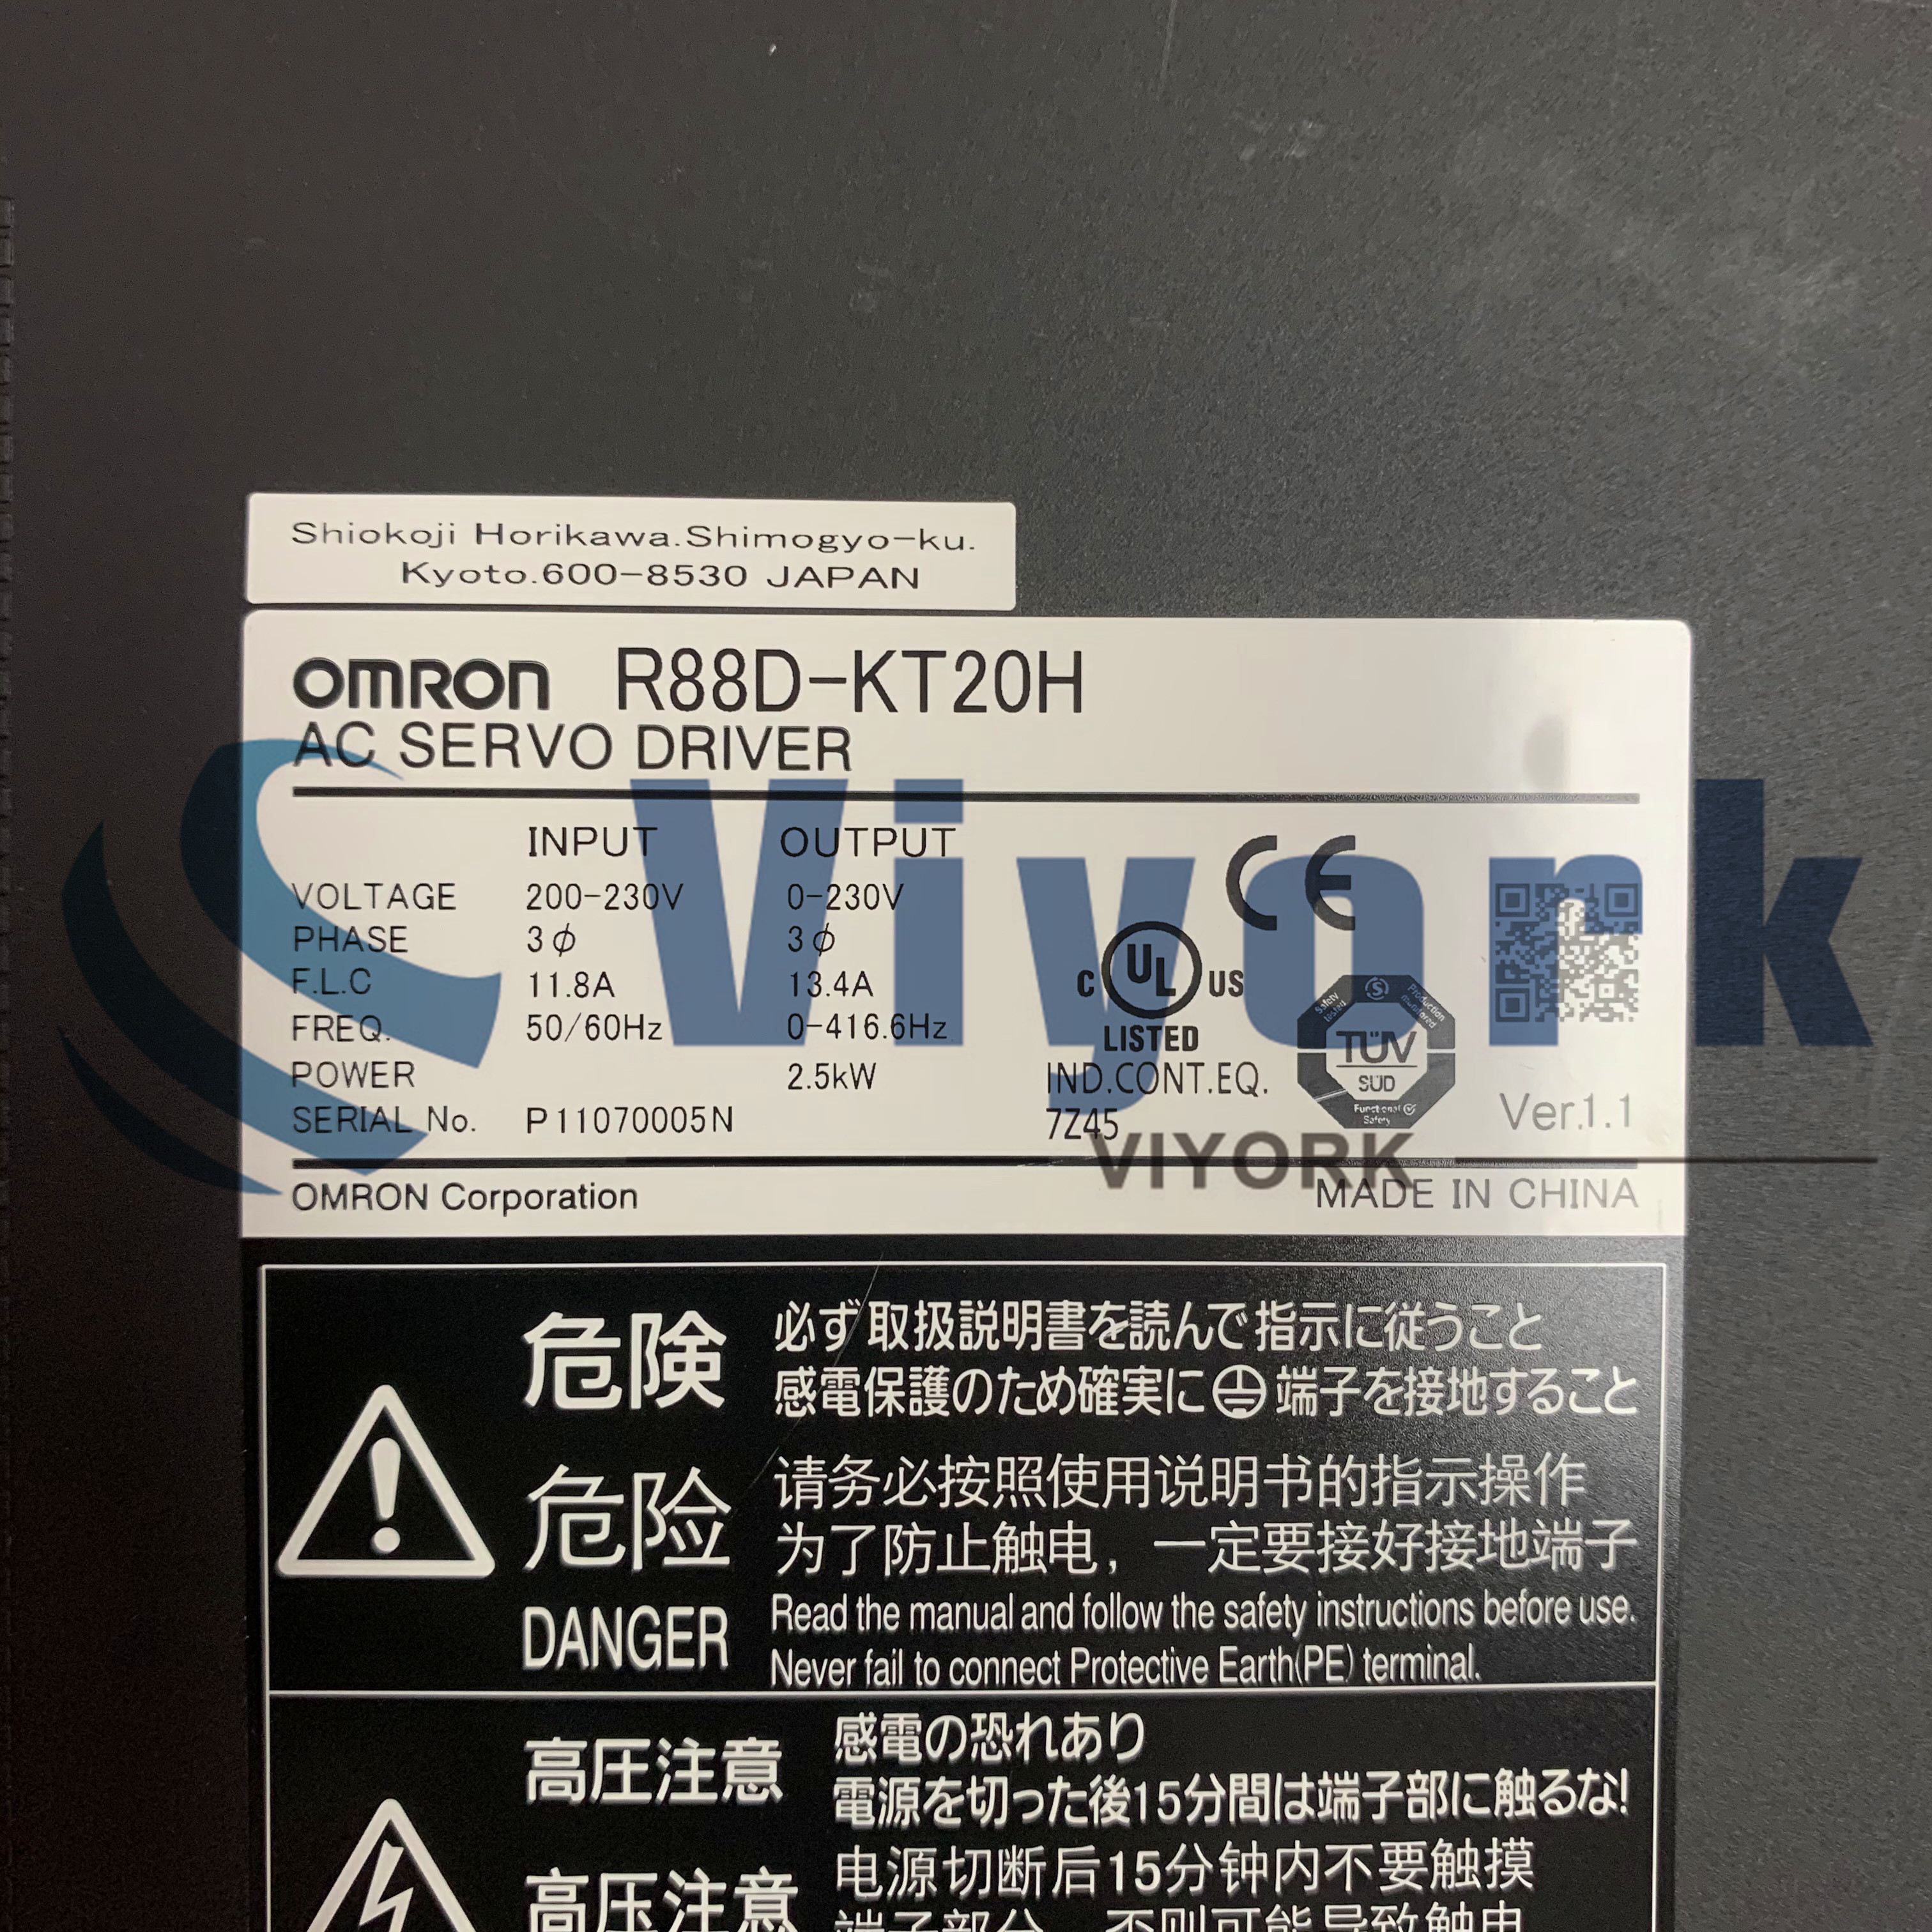 Omron R88D-KT20H